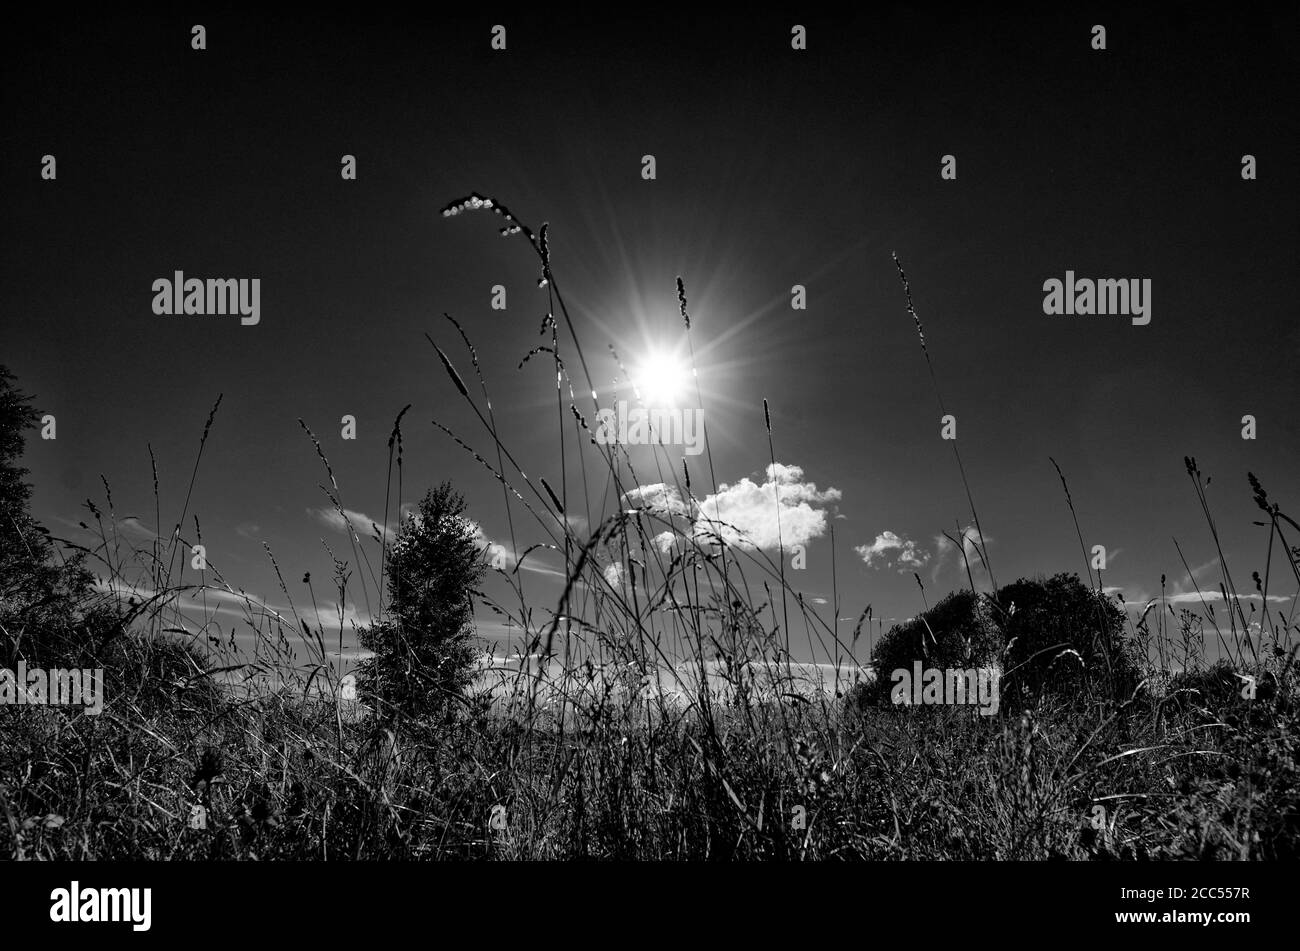 Black and white concept of a radiant sun in the sky with clouds and meadow grasses on the ground Stock Photo